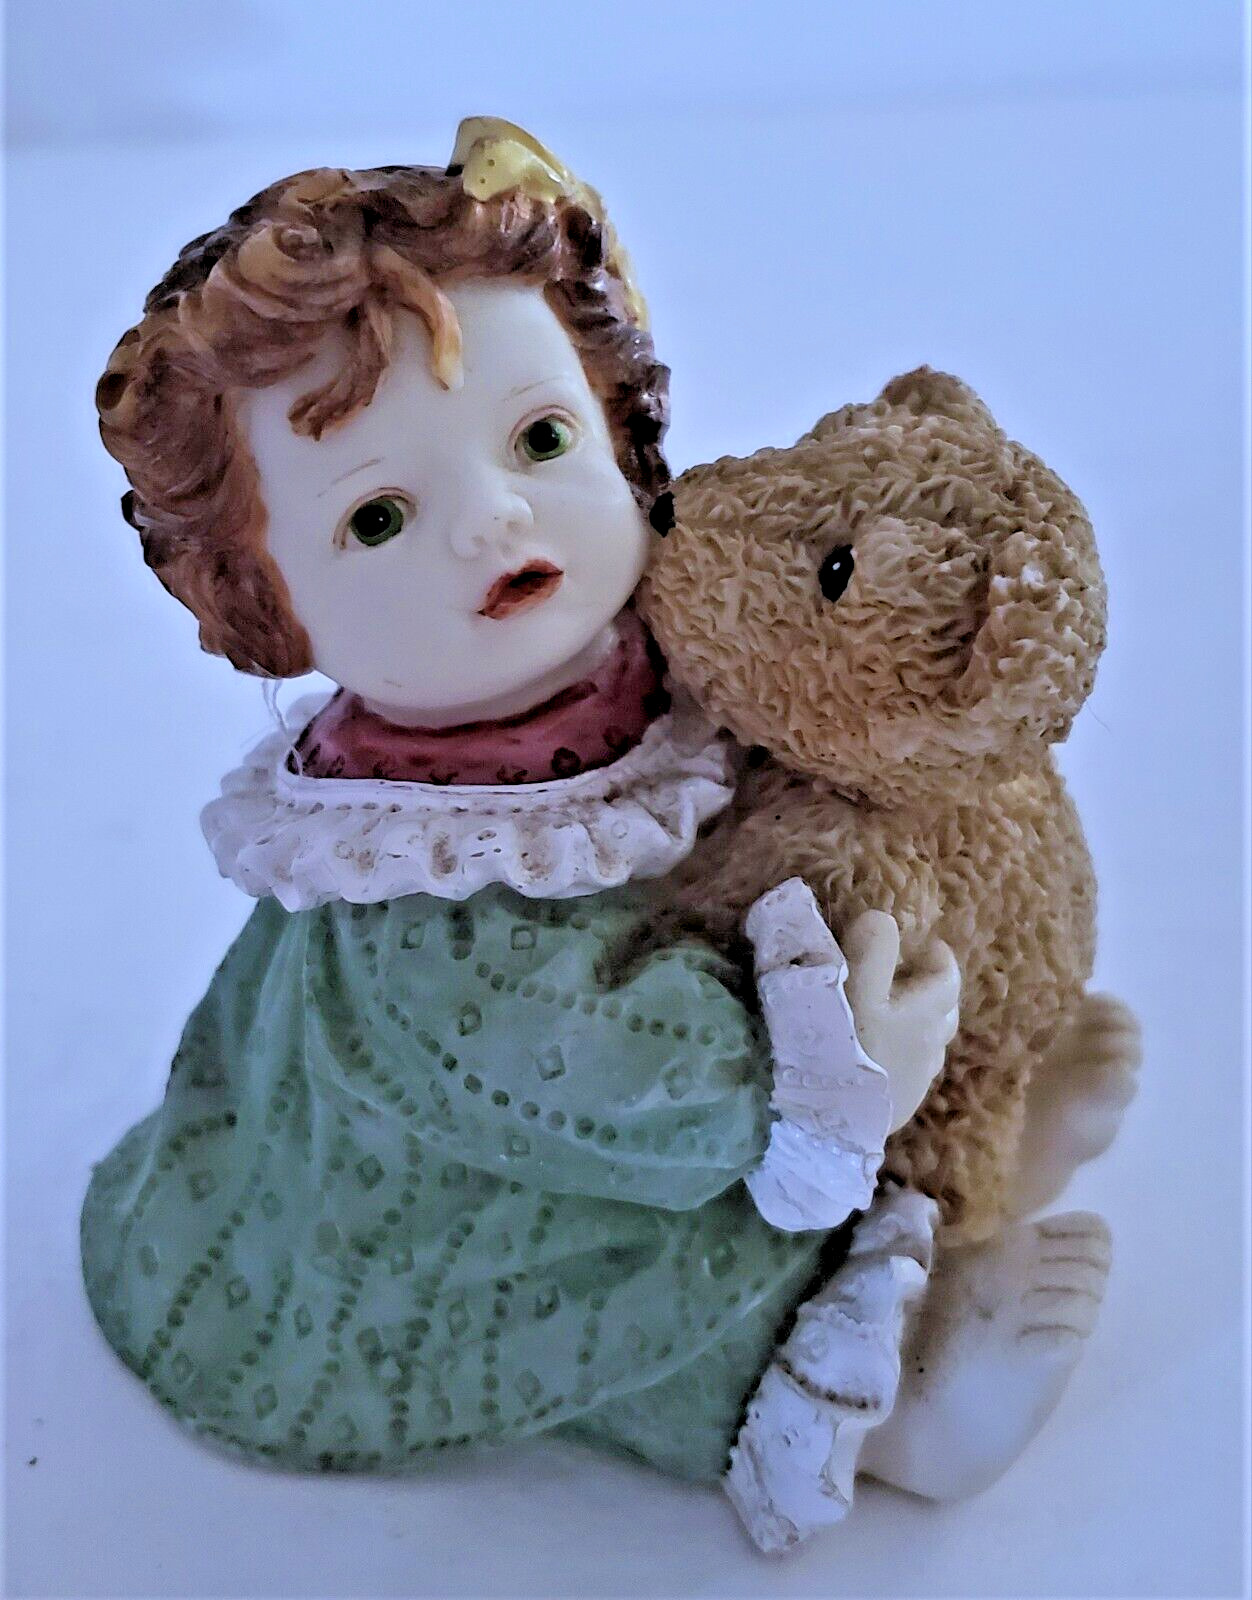 Windsor Mini Doll Collection “Betsy” #WC-207 Reg # 5G/0932 1995 Artisan Flair